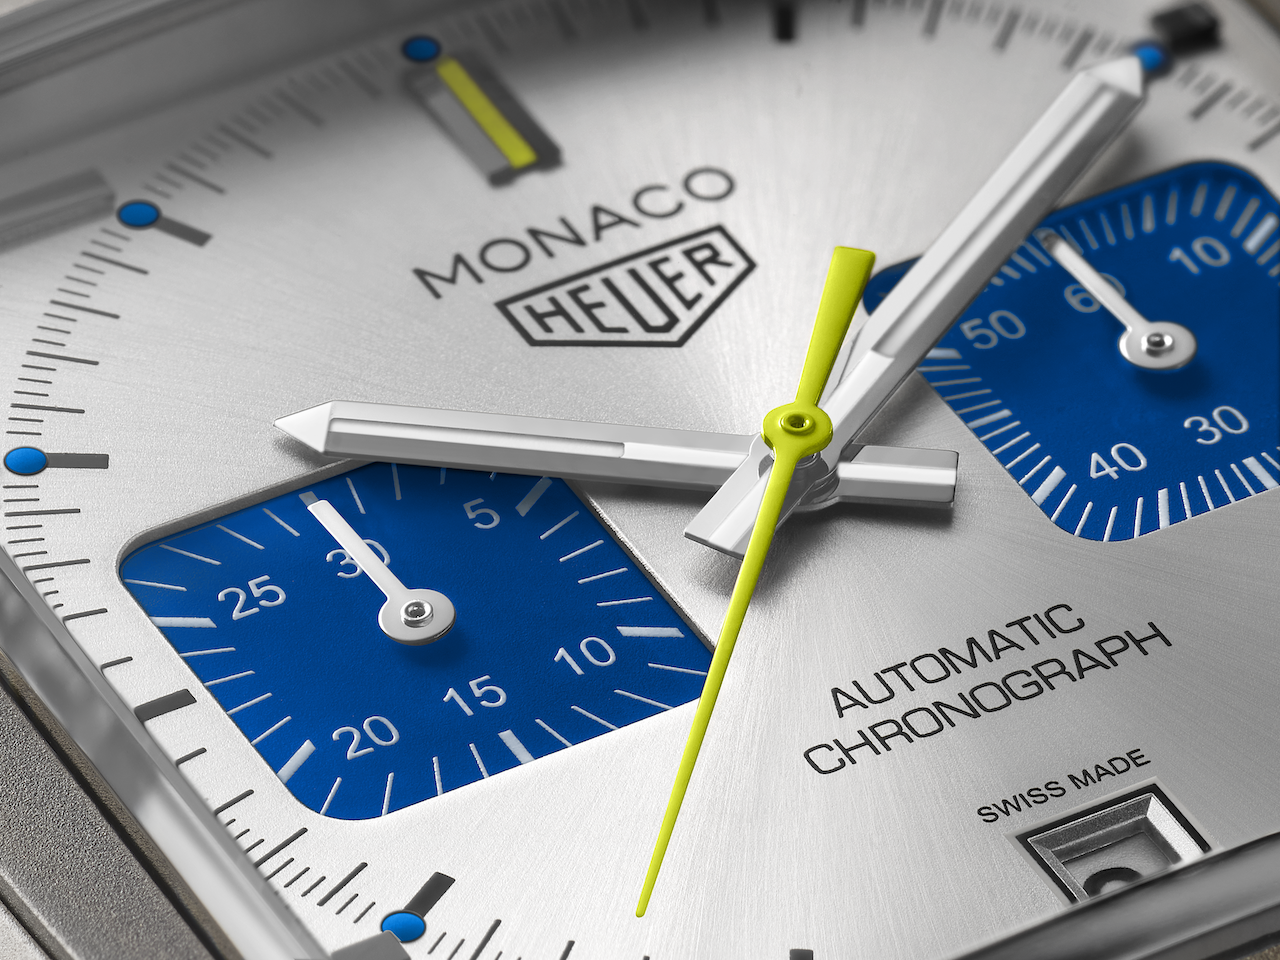 Swiss luxury watchmaker TAG Heuer has released a new rendition of its classic Monaco Chronograph in Racing Blue.